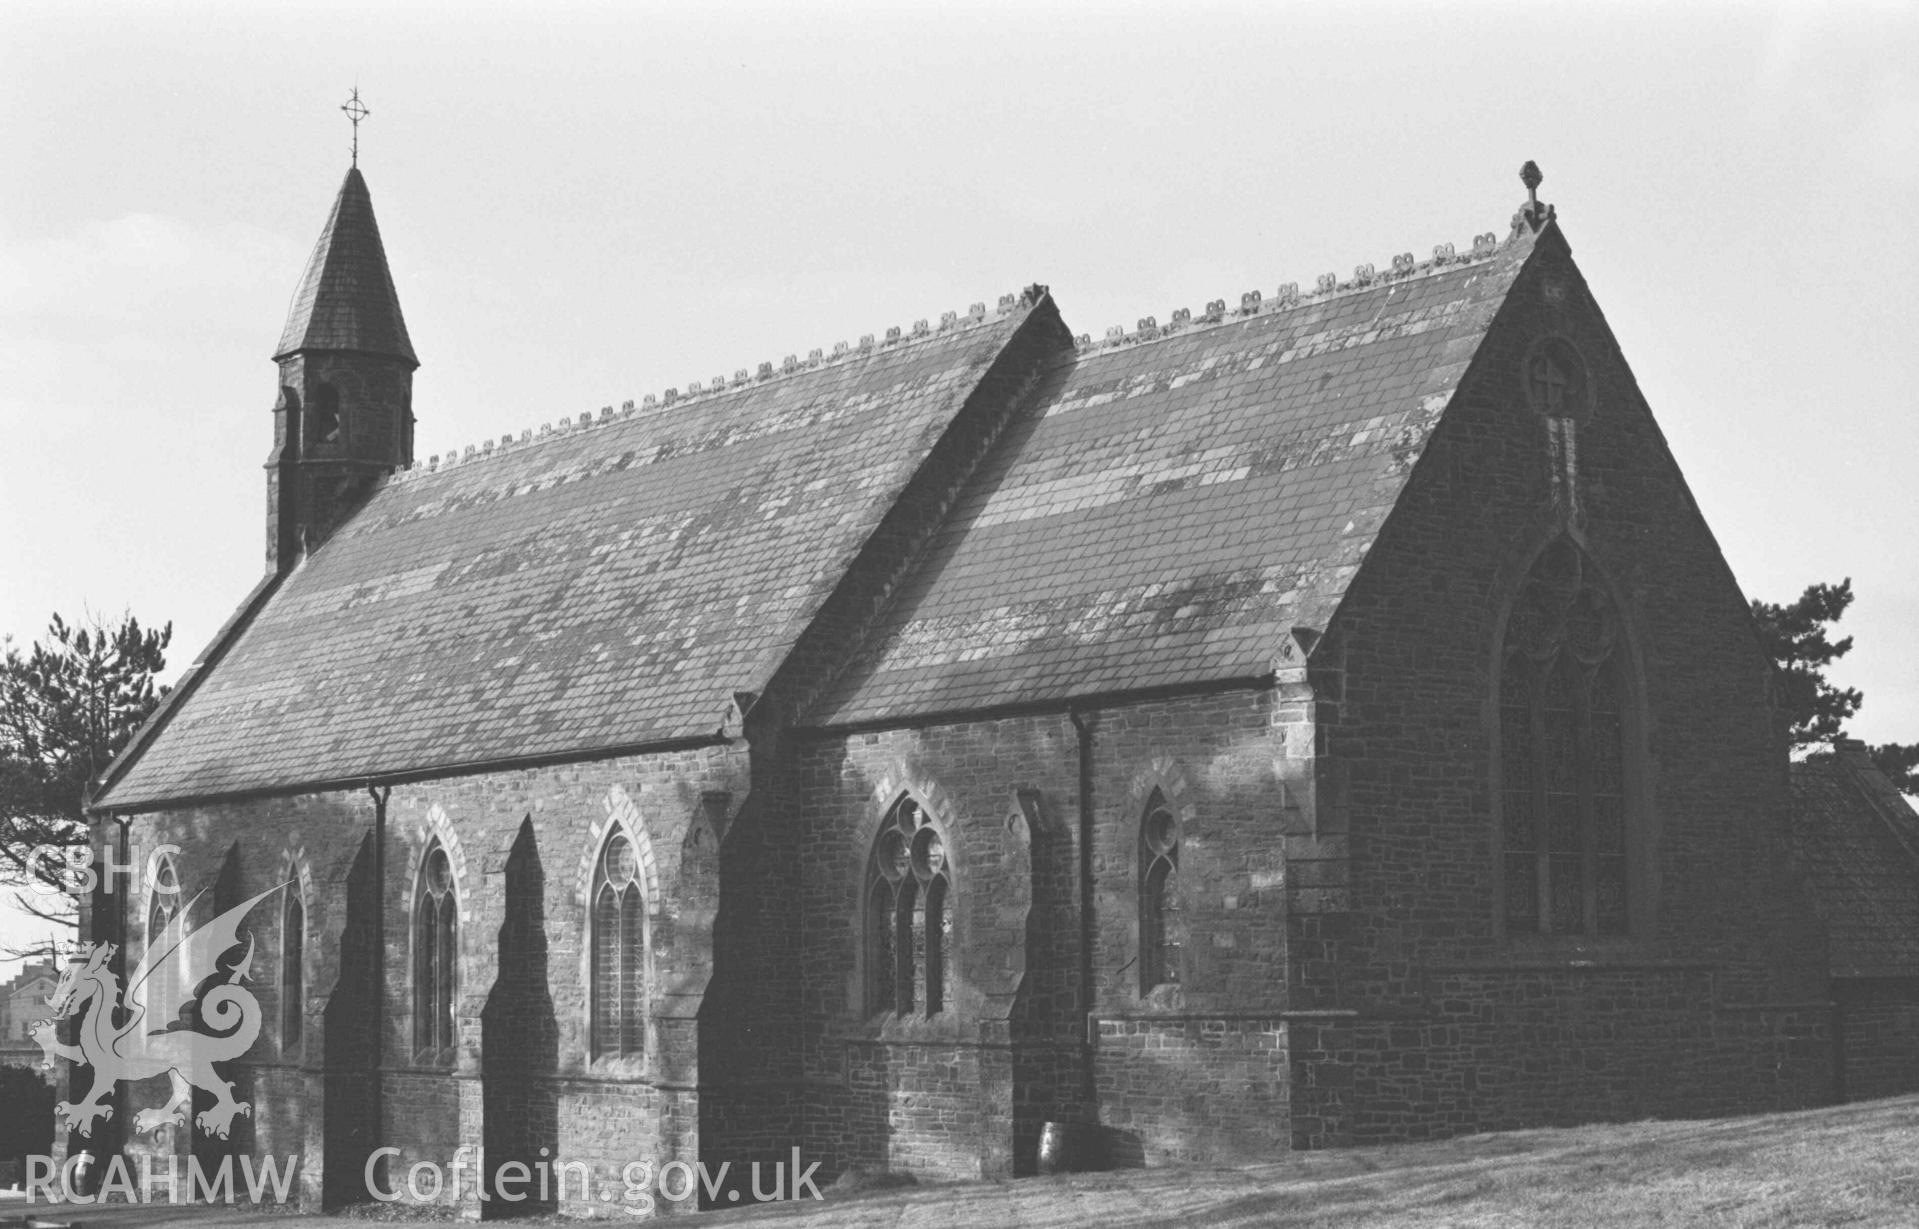 Digital copy of a black and white negative showing St Matthew's Parish Church, Borth. Photographed by Arthur Chater on 2 January 1969. Looking north west from Grid Reference SN 6122 8974.